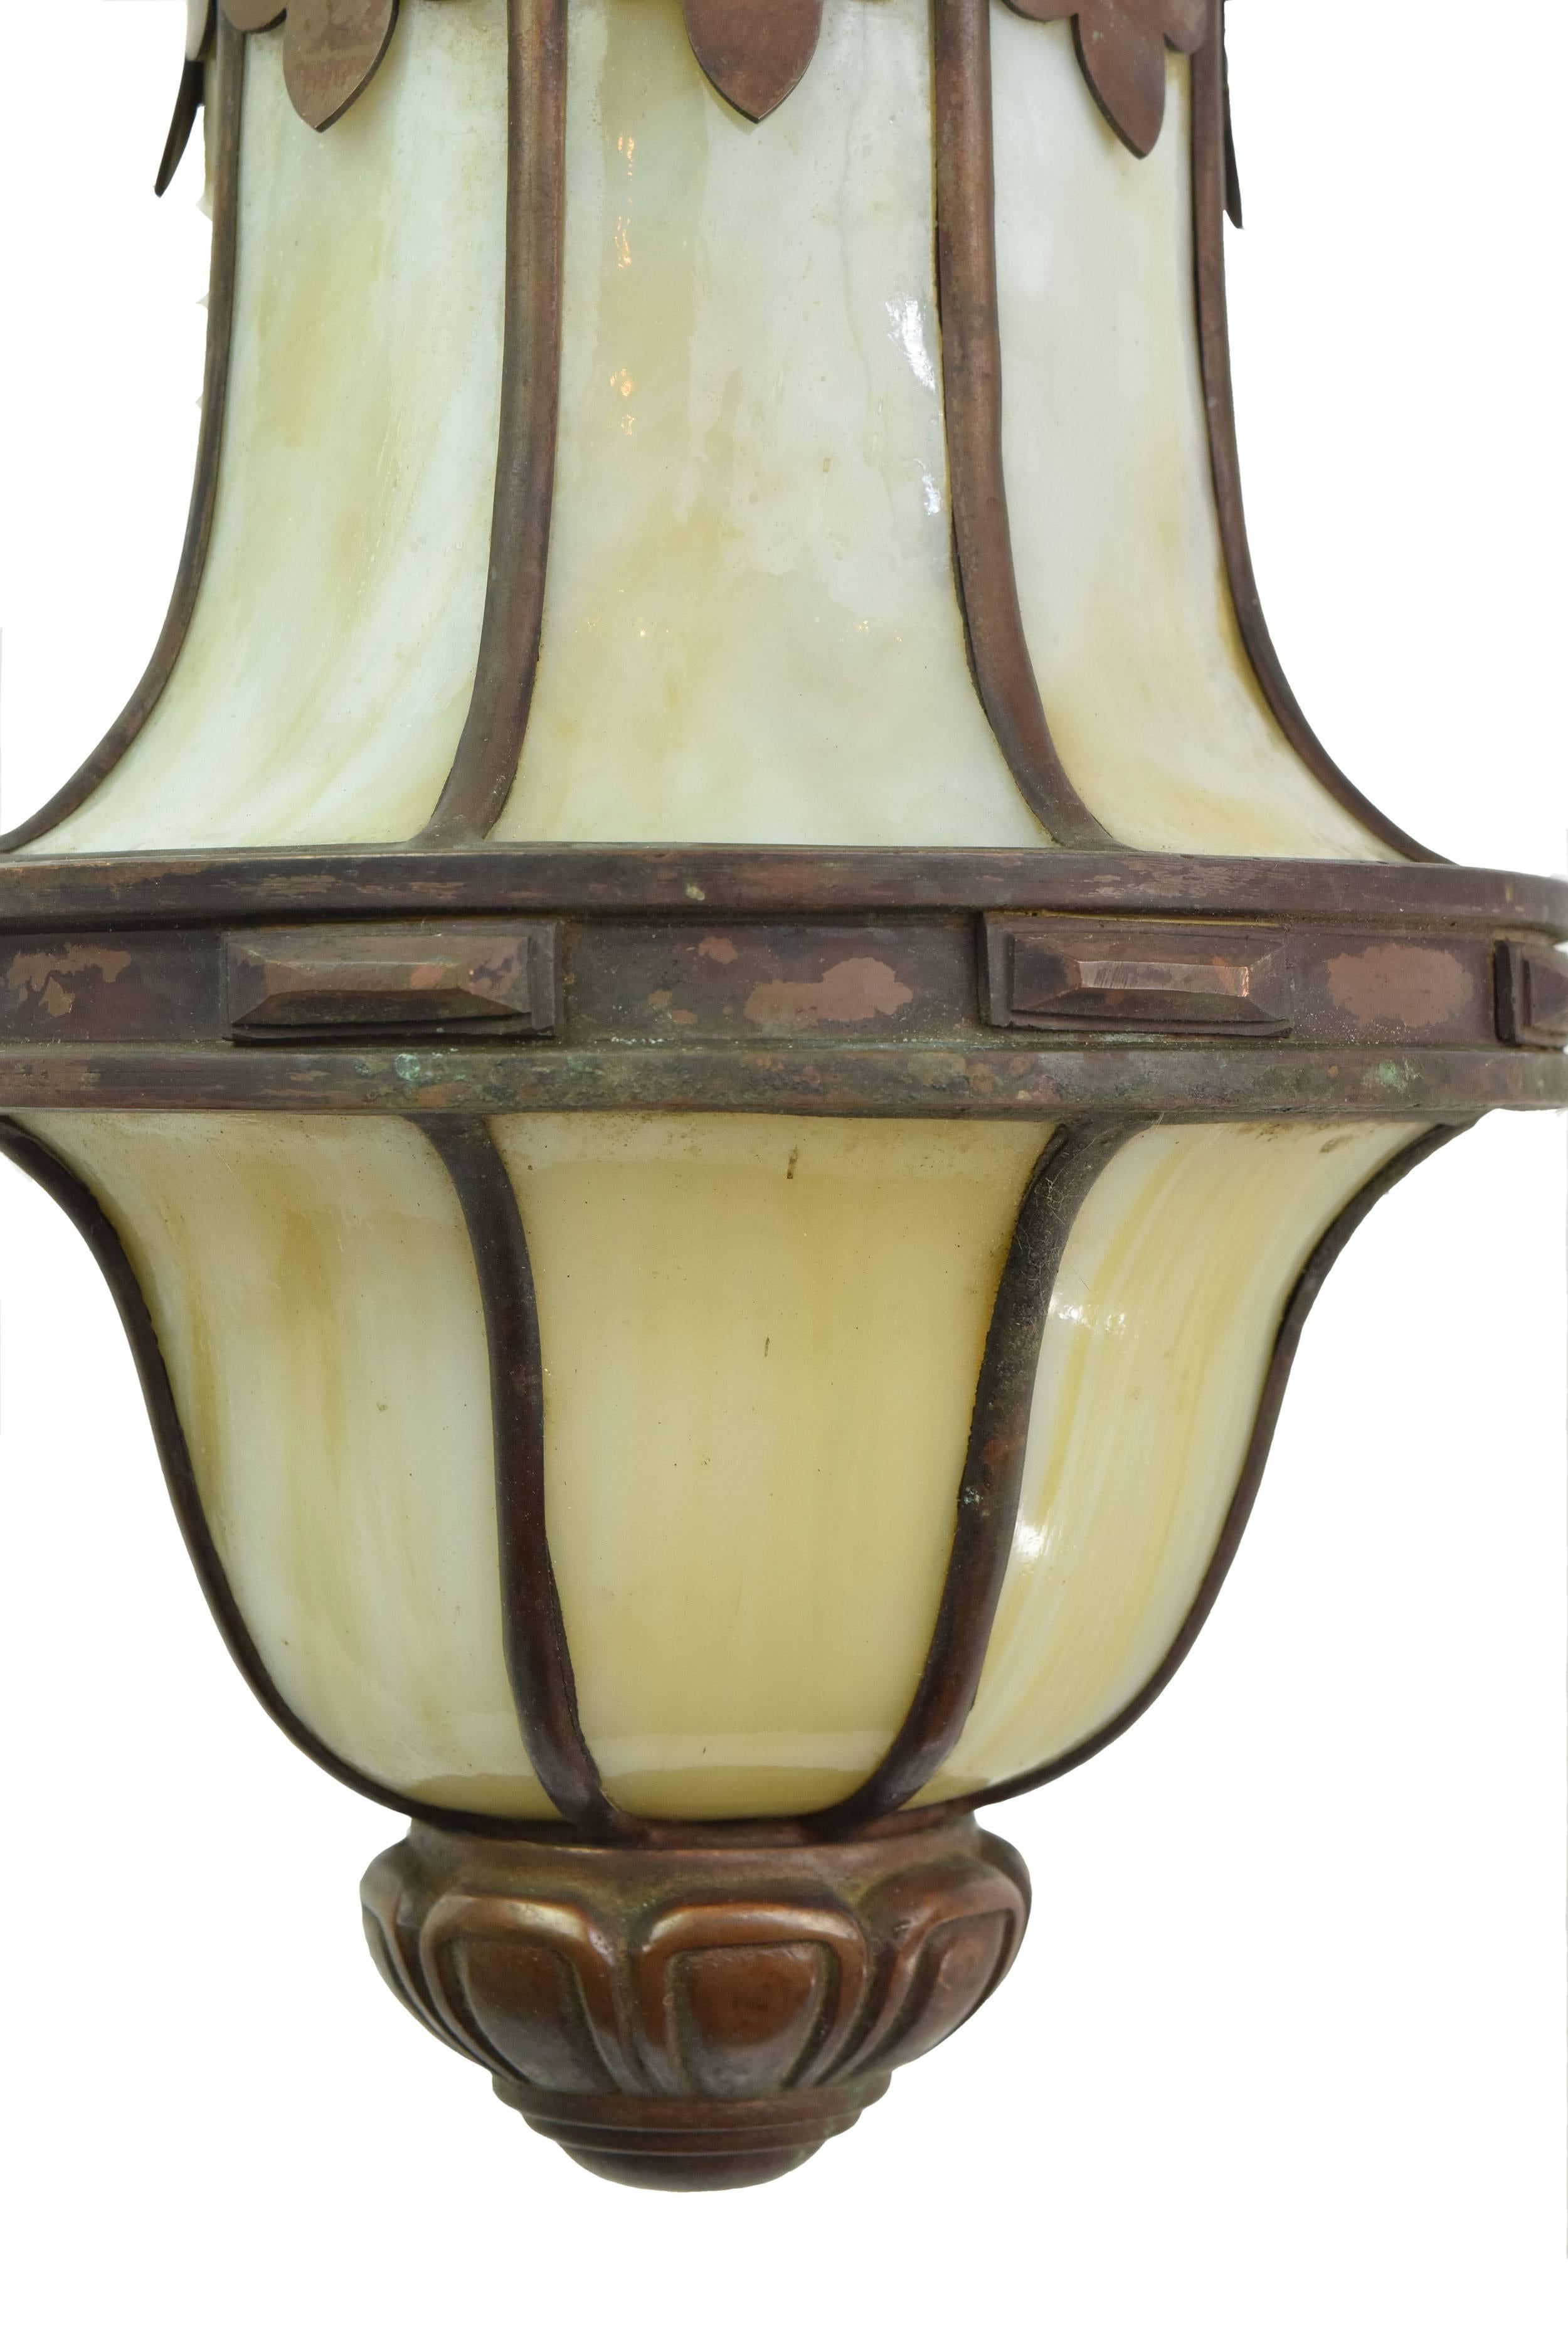 A beautiful green glass lantern with bronze metal work will become an impressive accent piece in your home. This lantern would be perfect in a foyer or formal dining room!

Finish: Original
One medium socket

We find that early antique lighting